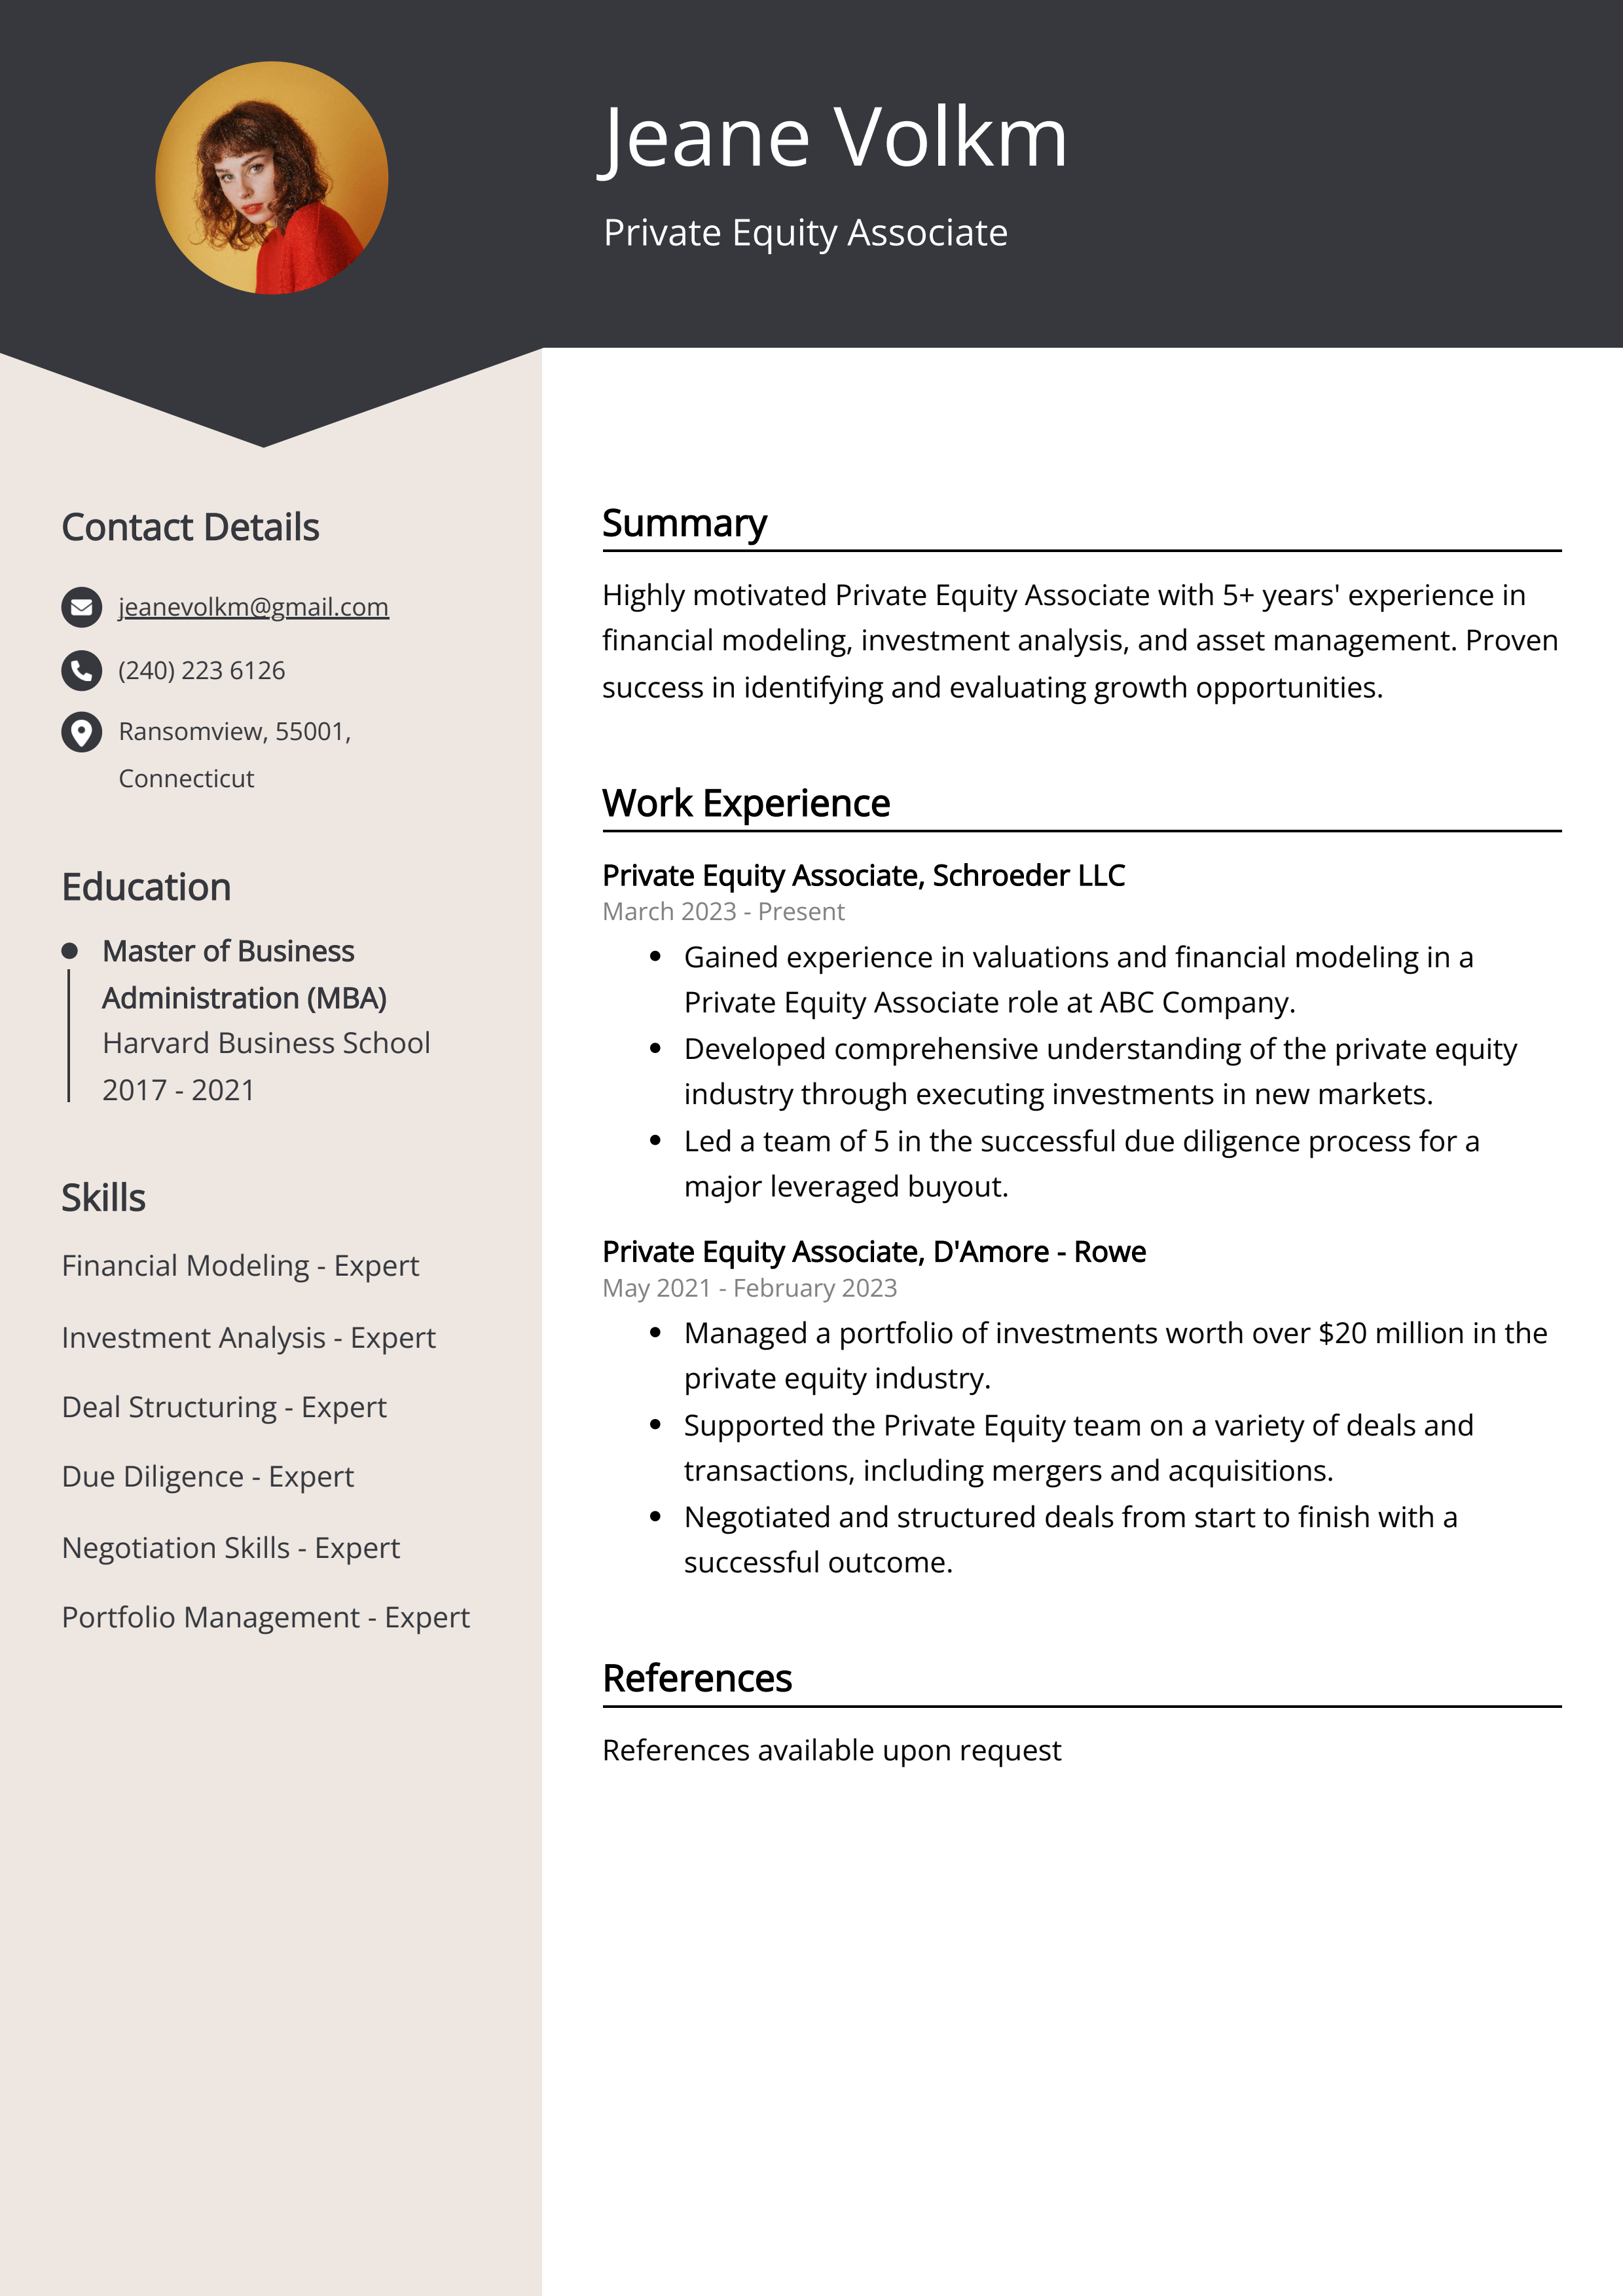 Private Equity Associate CV Example